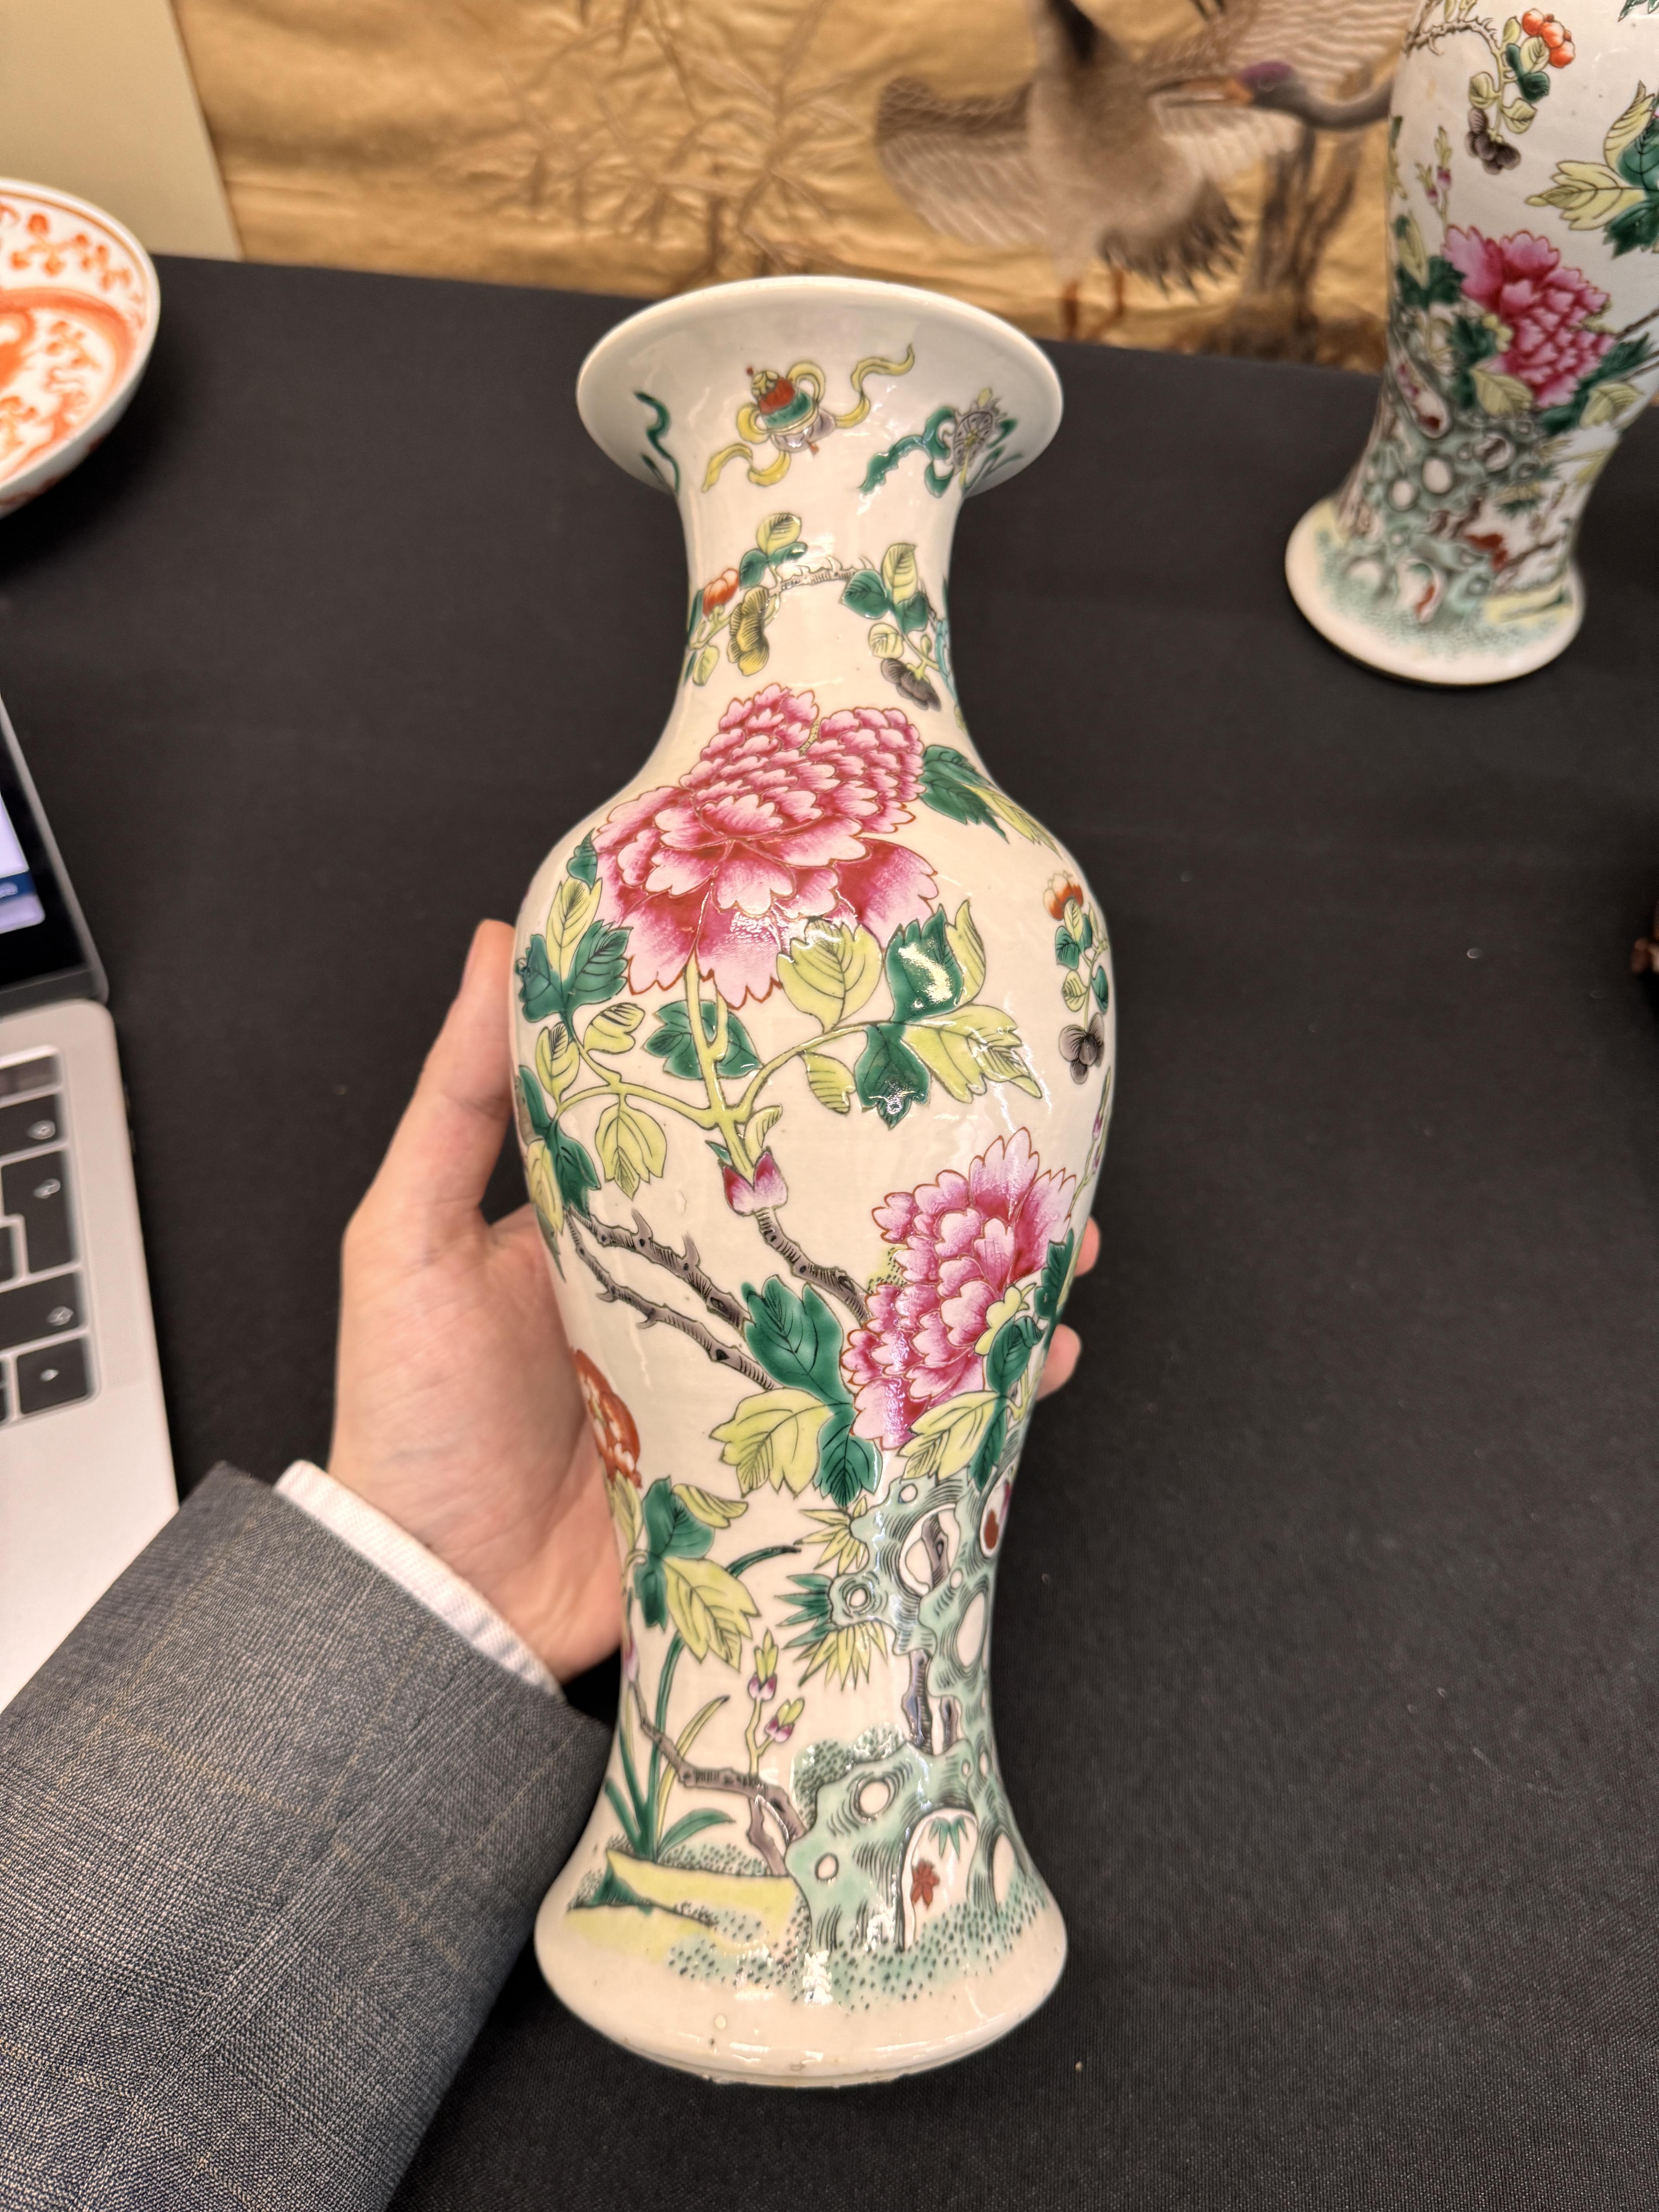 A PAIR OF CHINESE FAMILLE-ROSE 'PEONY' VASES 清 十九或二十世紀 粉彩牡丹紋瓶一對 - Image 19 of 19